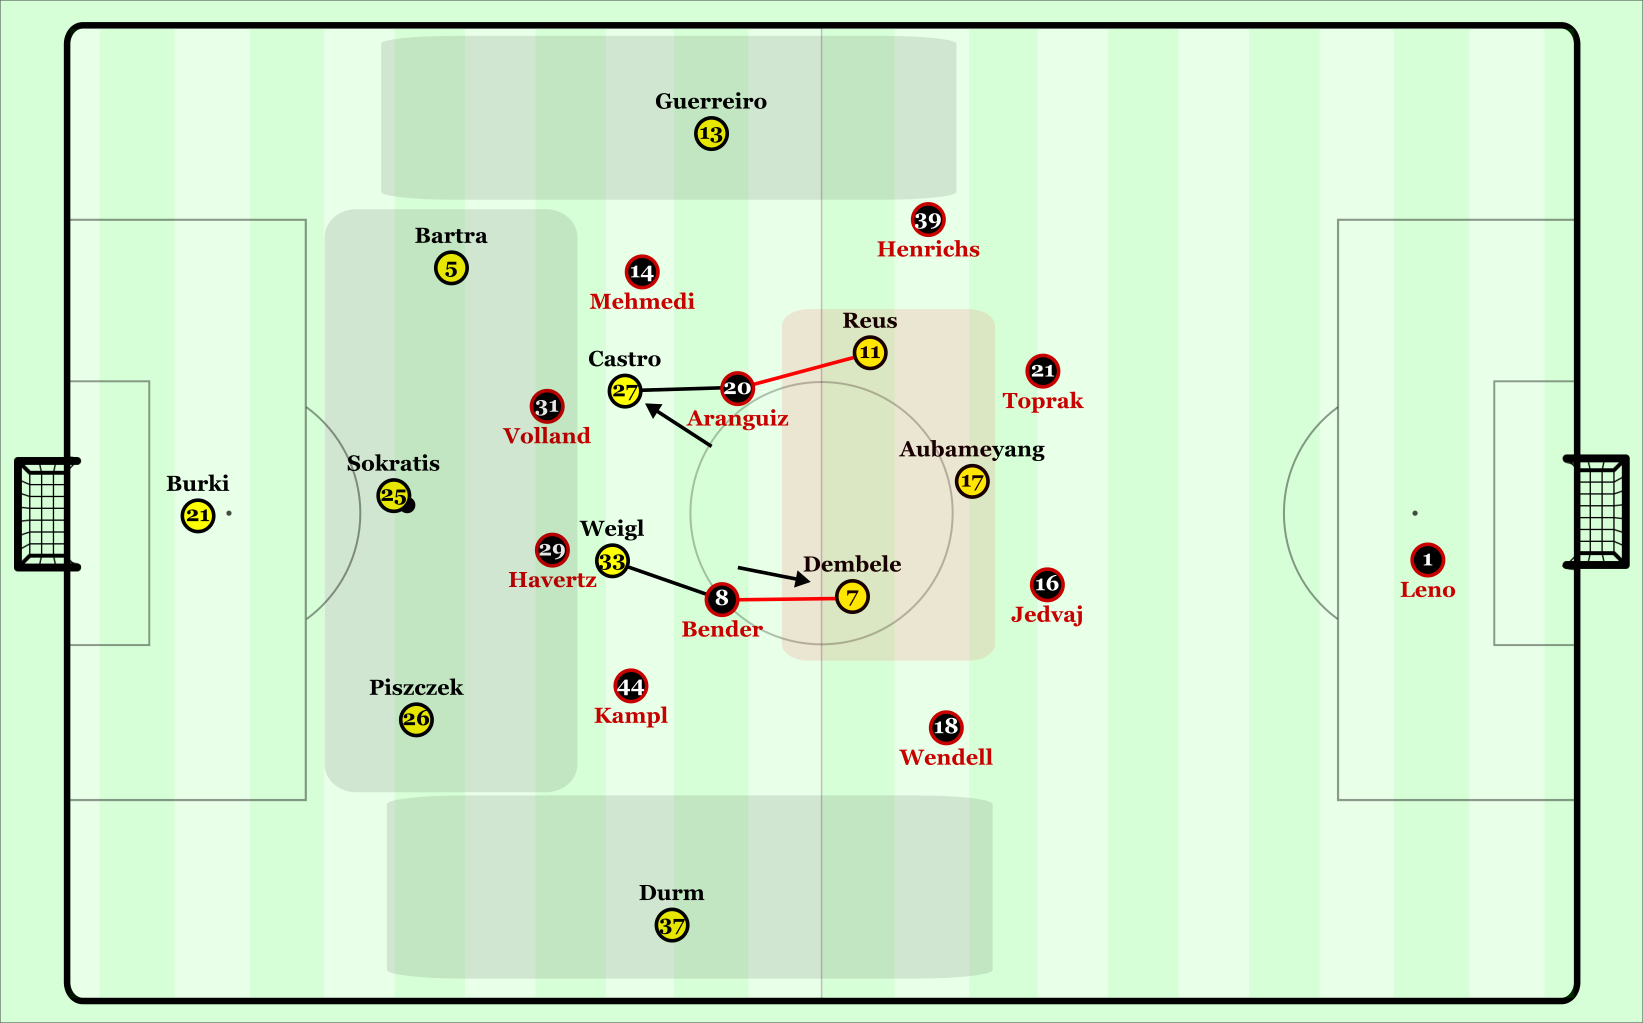 Dortmund's base 3-2-4-1, adapted from their original 3-1-4-2.